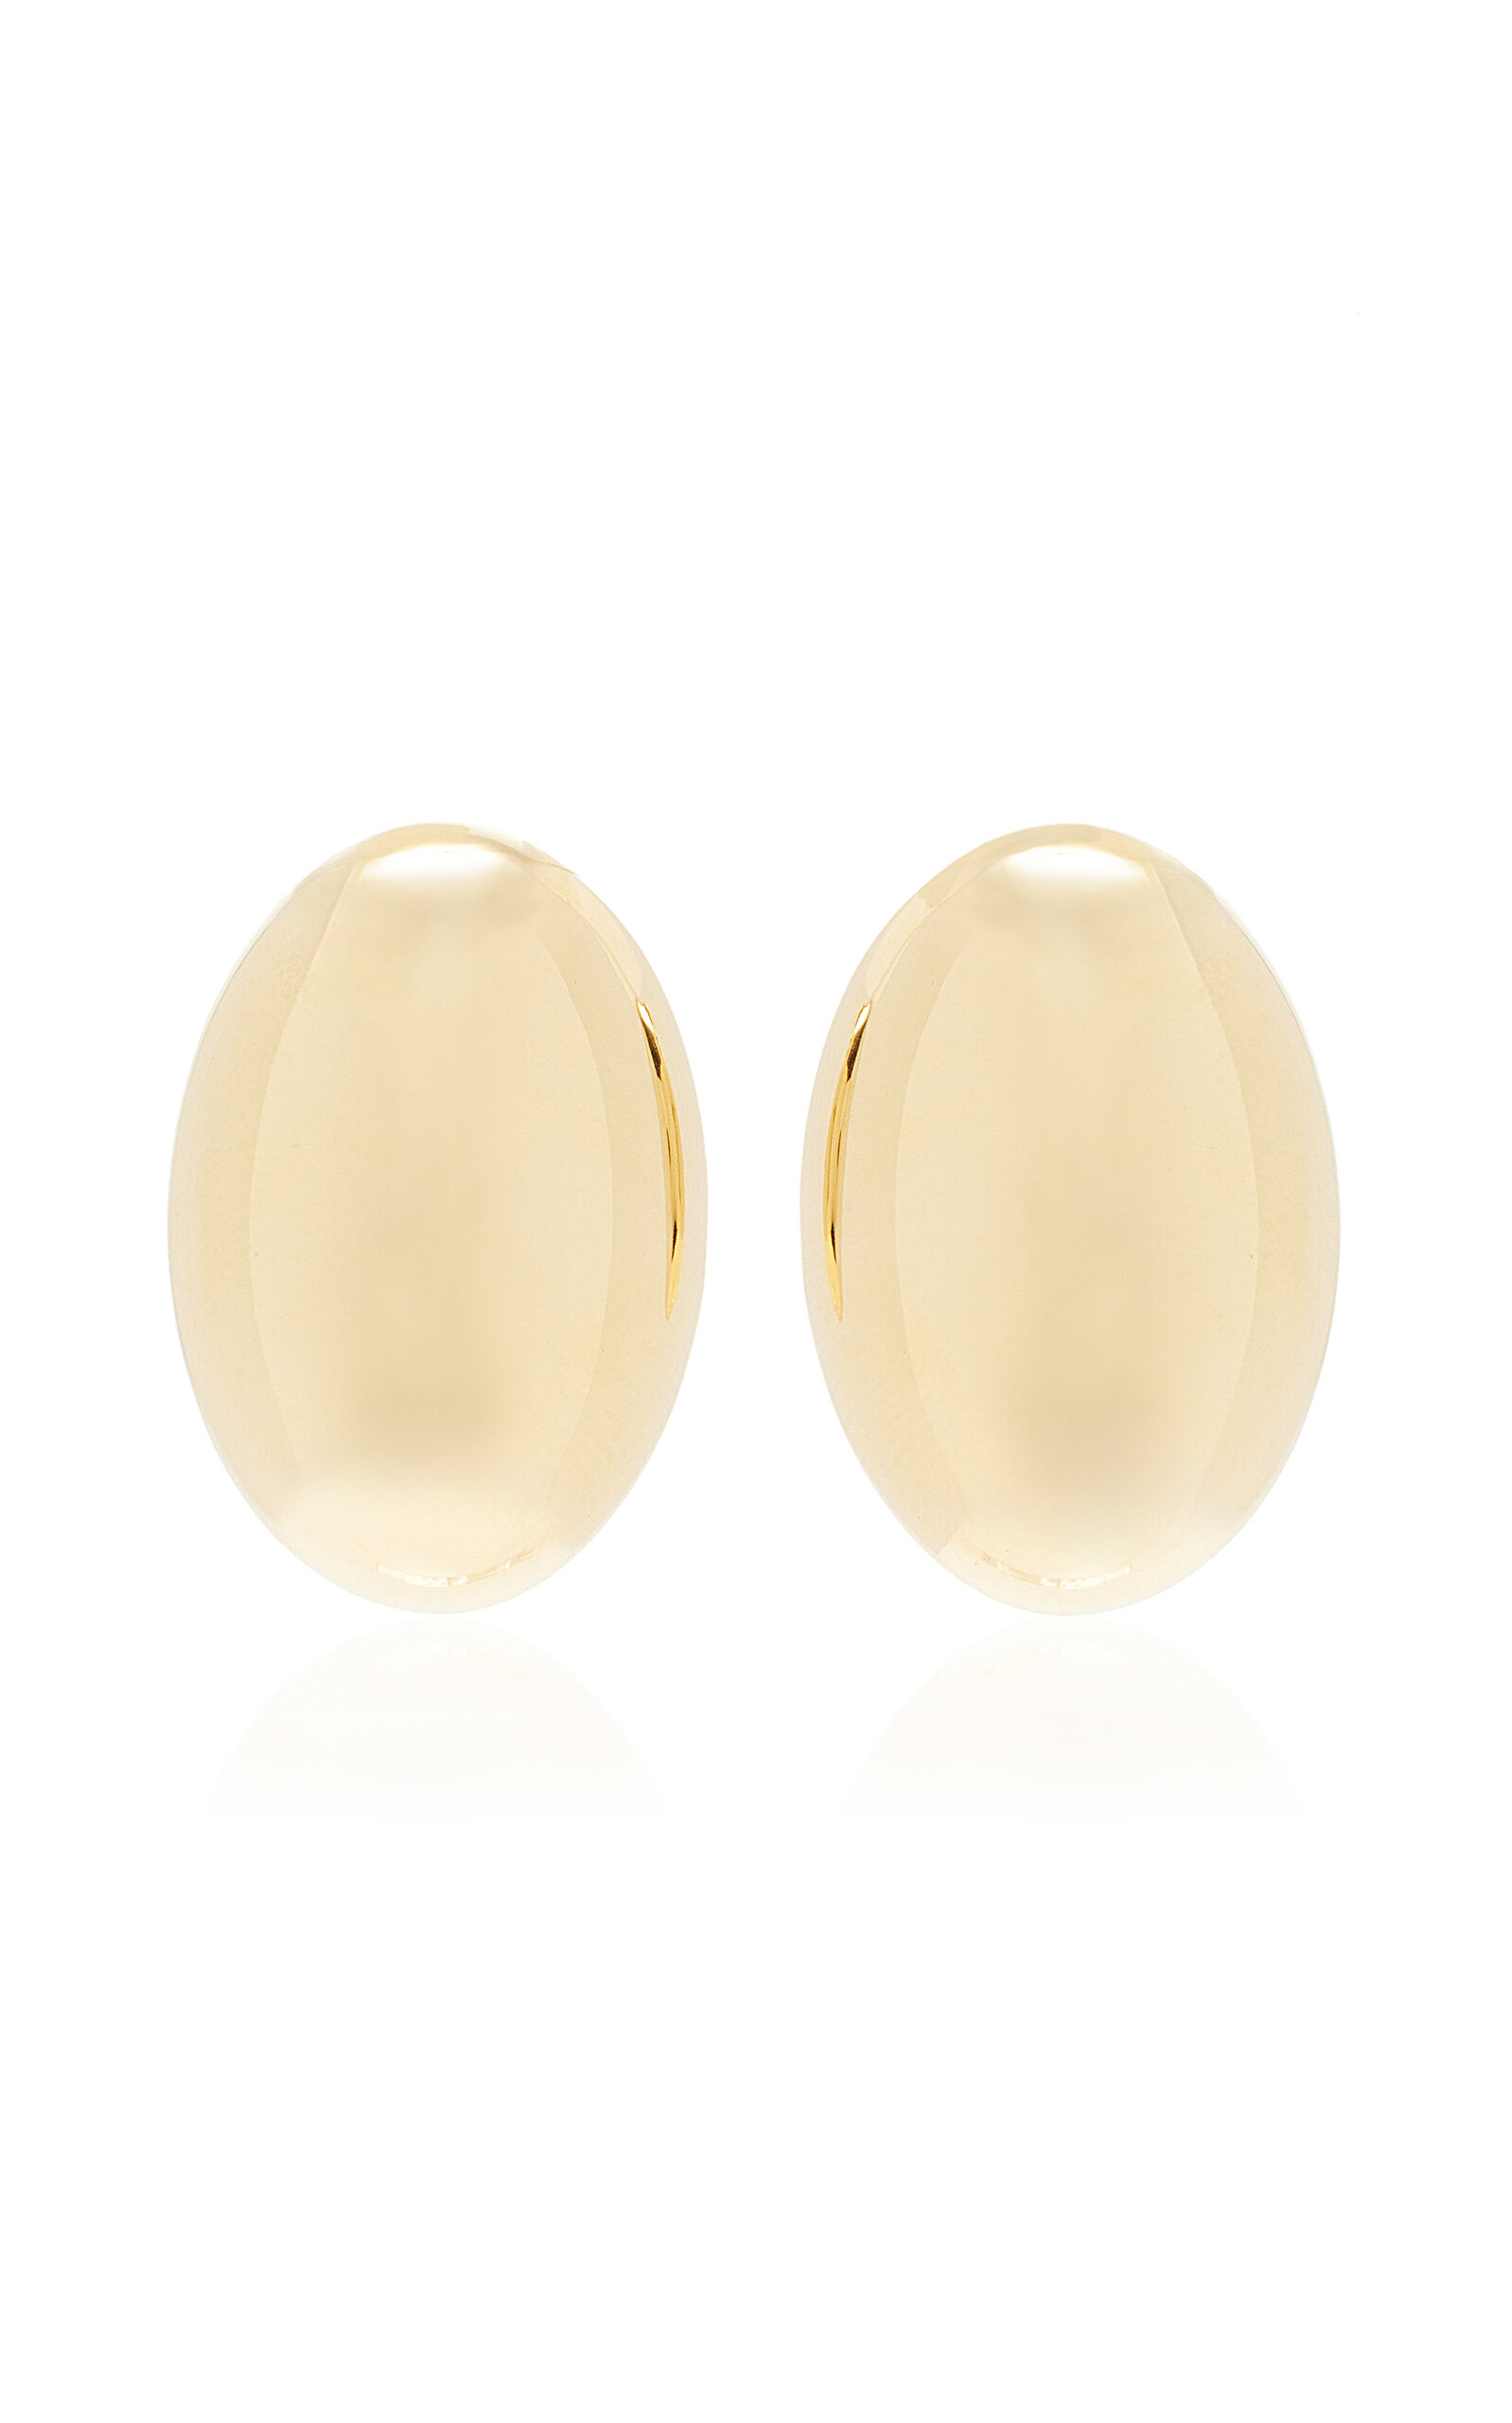 Lie Studio The Camille 18k Gold-plated Earrings